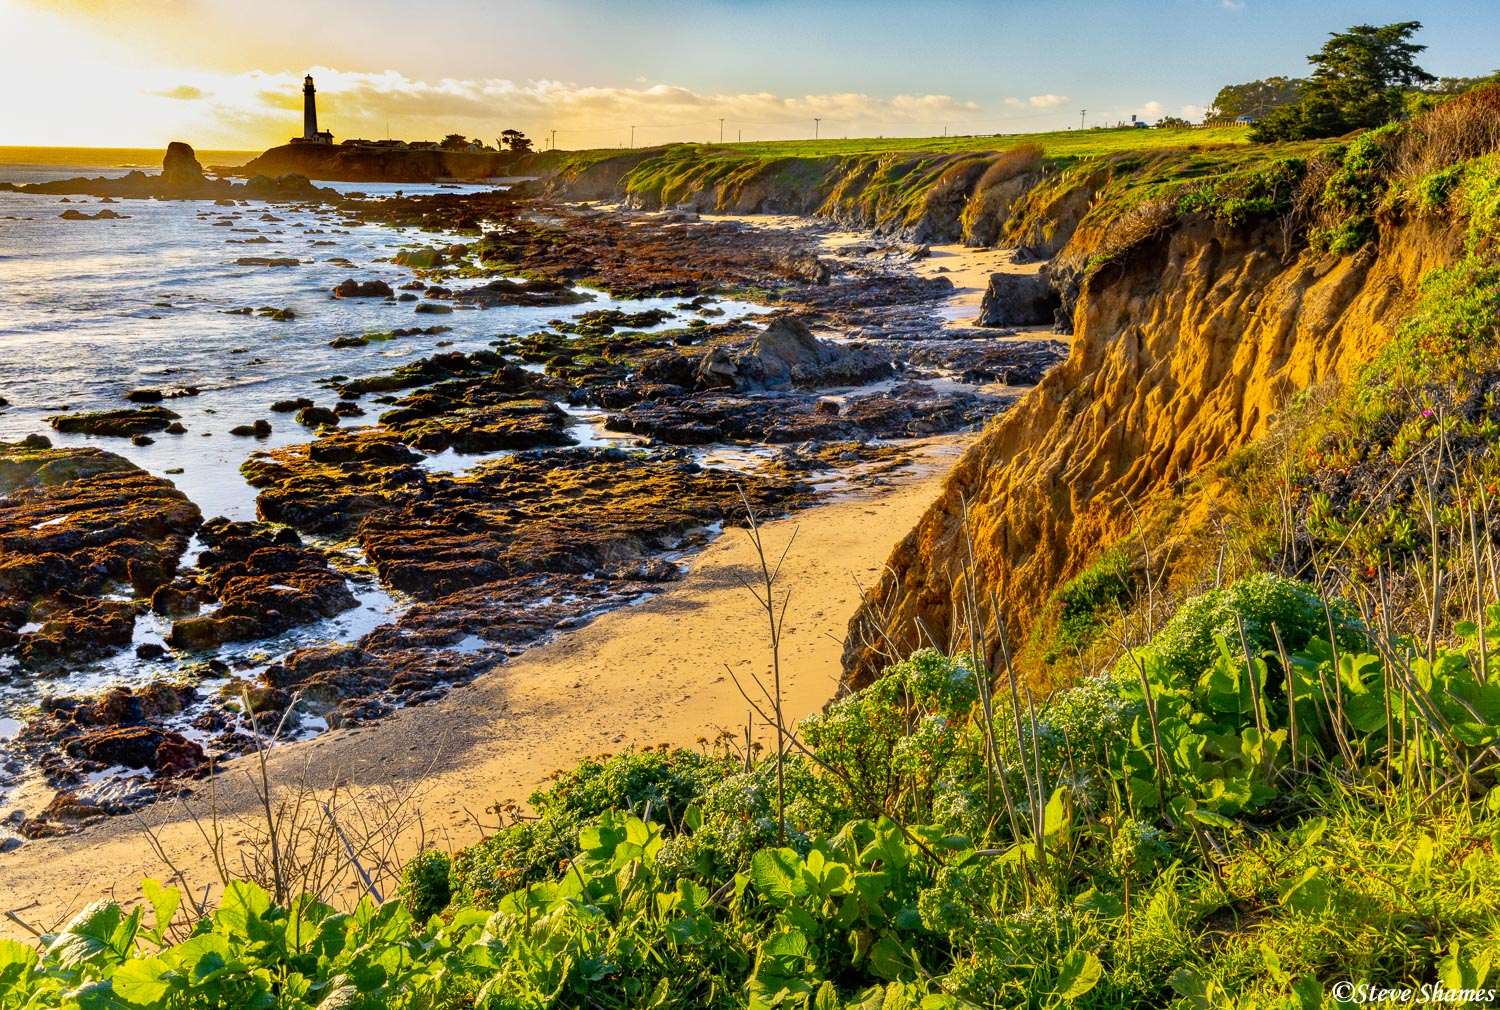 Here is Pigeon Point Lighthouse, overlooking the rocky coast.